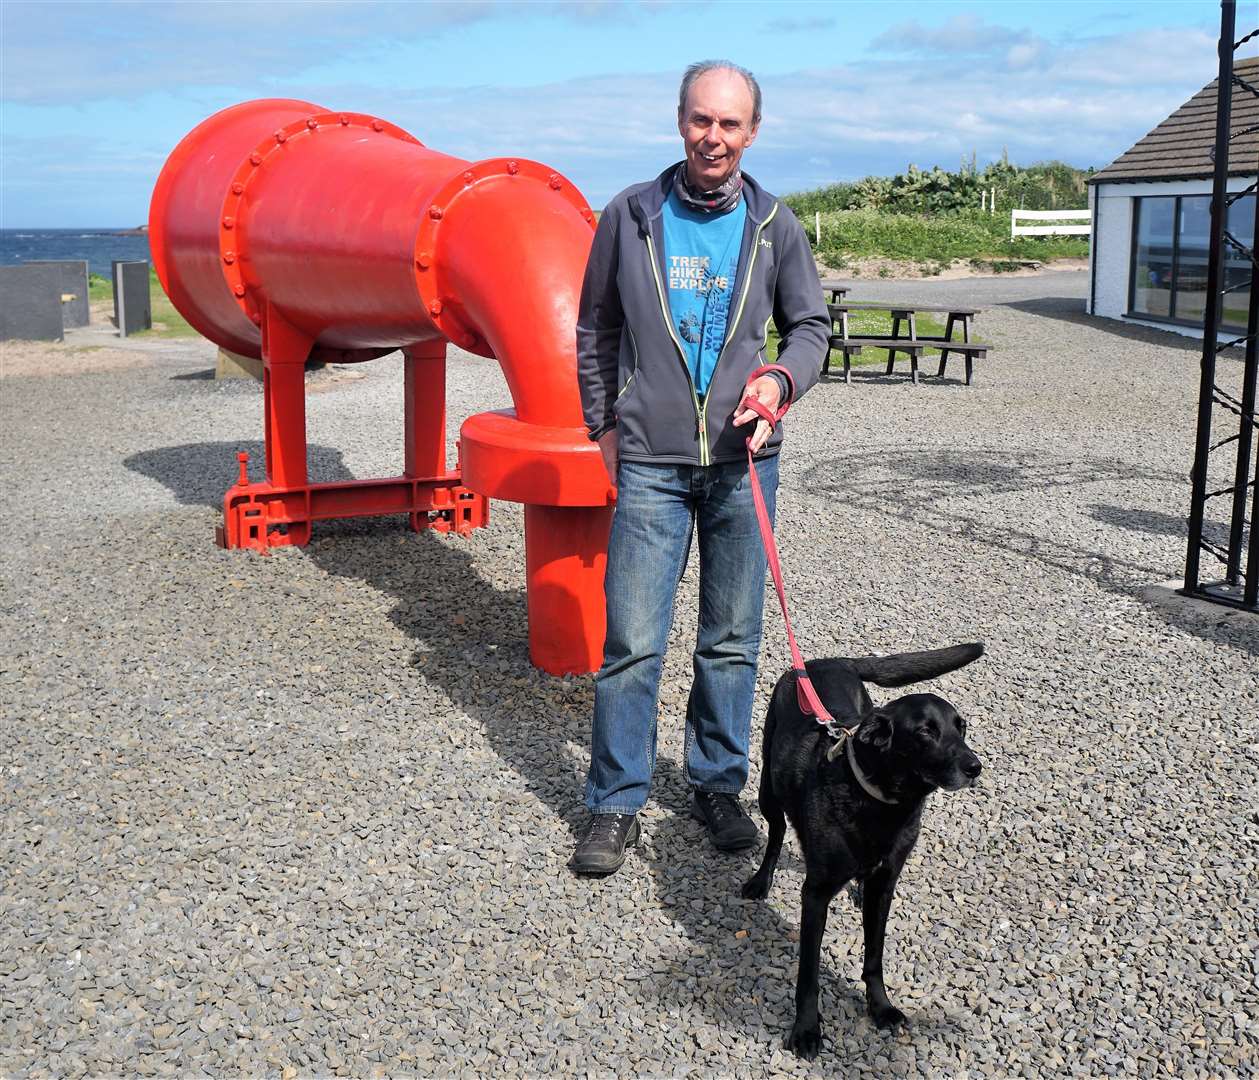 Charlie Bain donated £1000 to the project and has helped maintain the trail since its inception. Charlie is a keen walker who has gone on global treks. As ever, he was accompanied by his faithful companion Jet the dog on Monday.